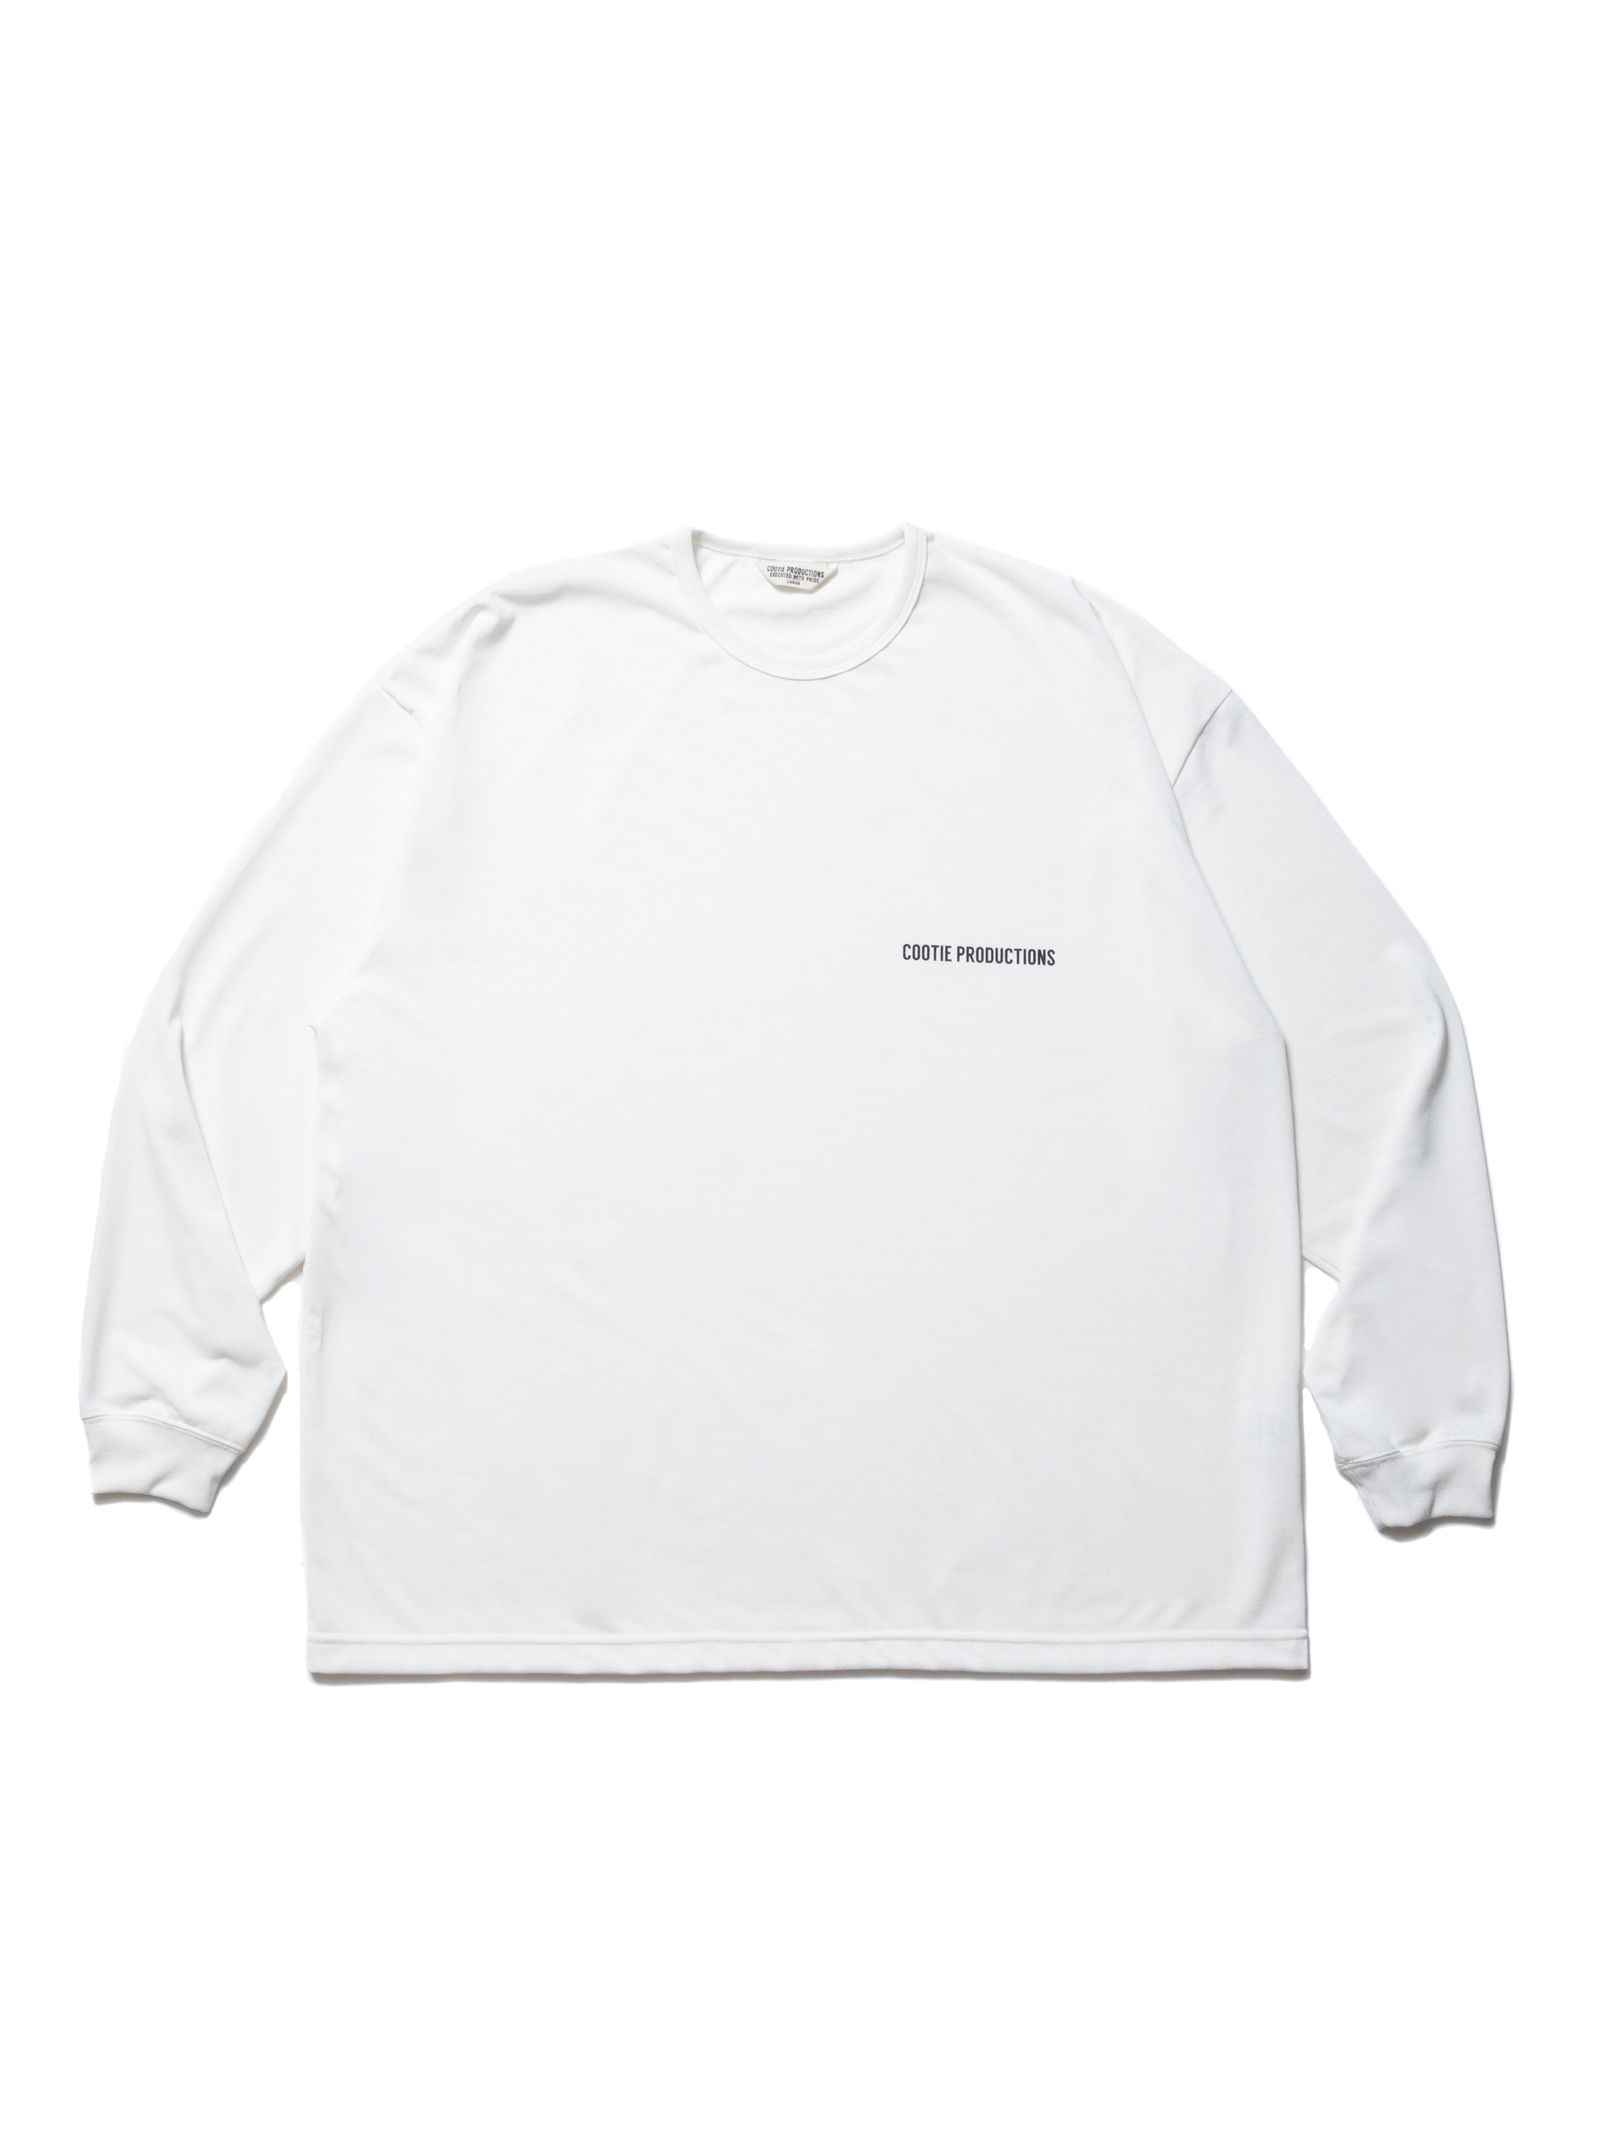 COOTIE PRODUCTIONS - Dry Tech Jersey Oversized L/S Tee / WHITE